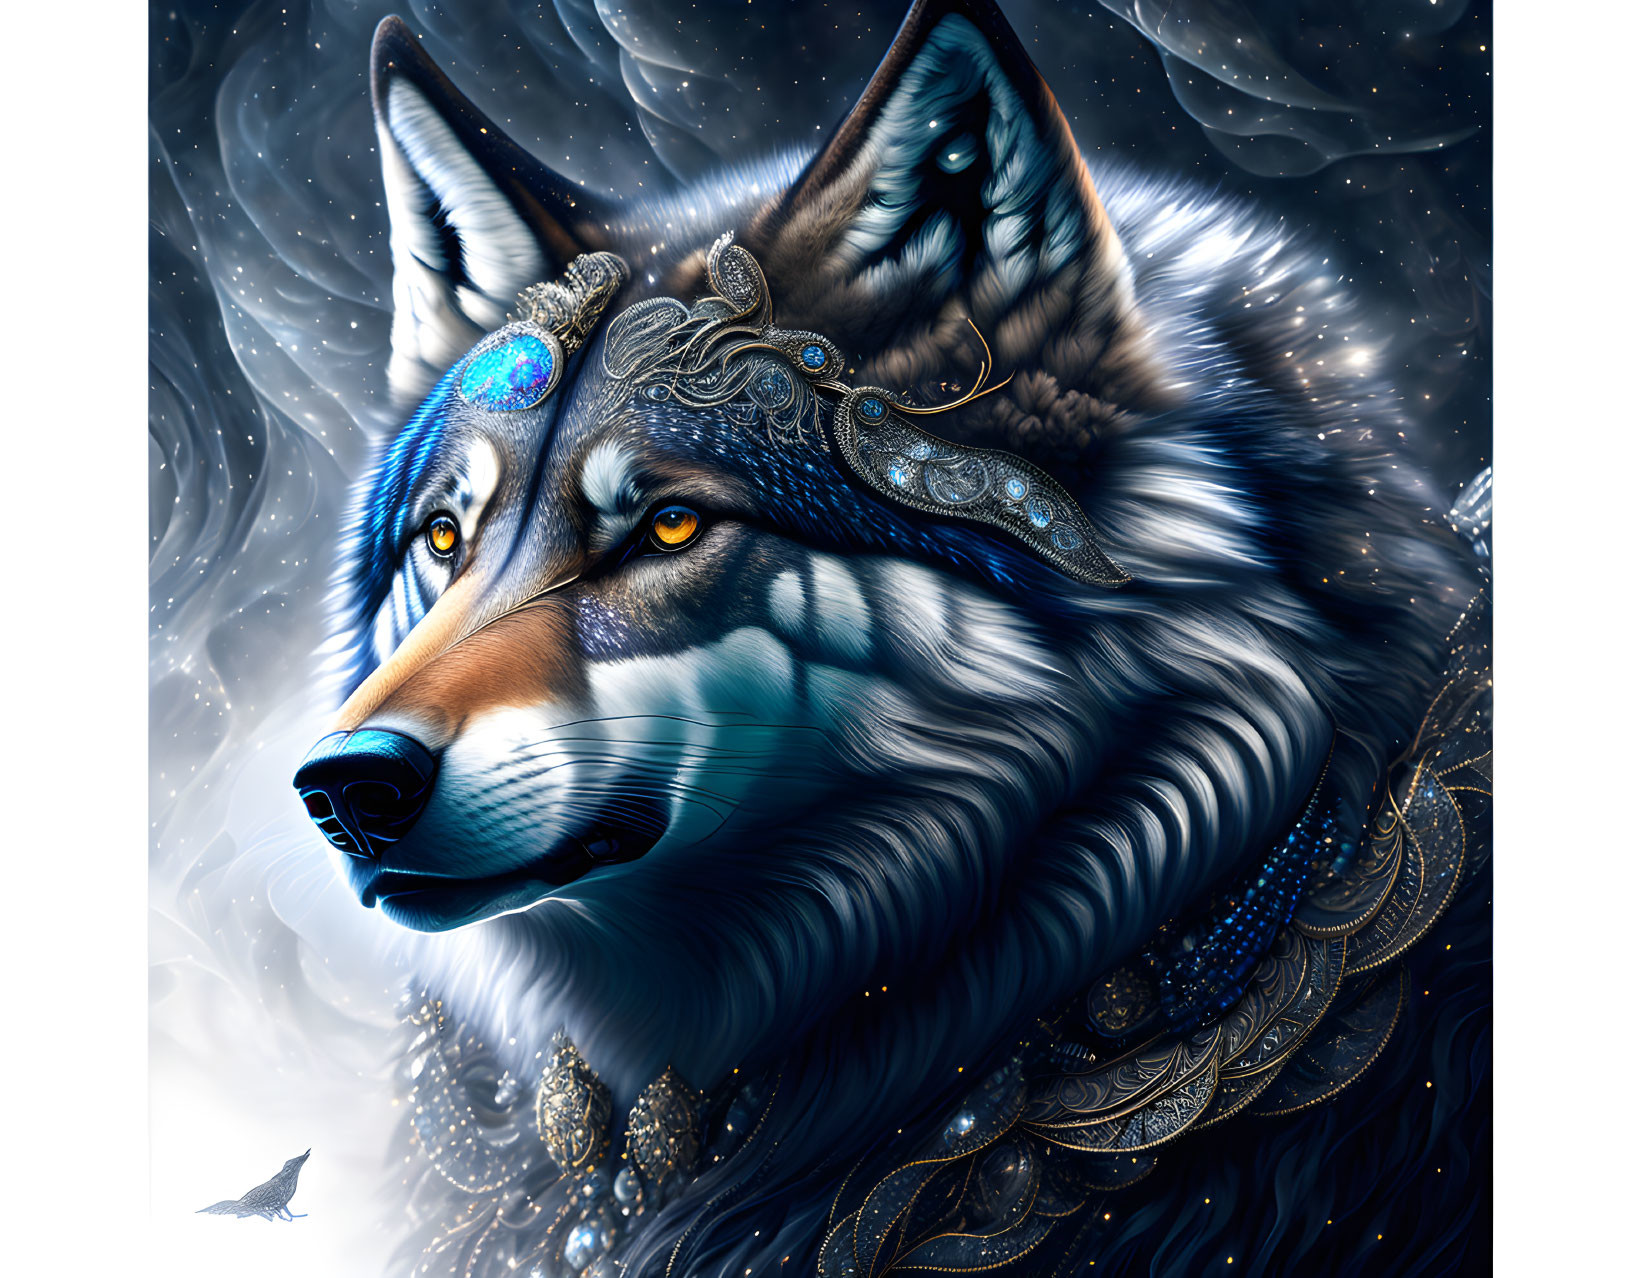 Majestic wolf digital artwork with intricate patterns and vibrant blue accents